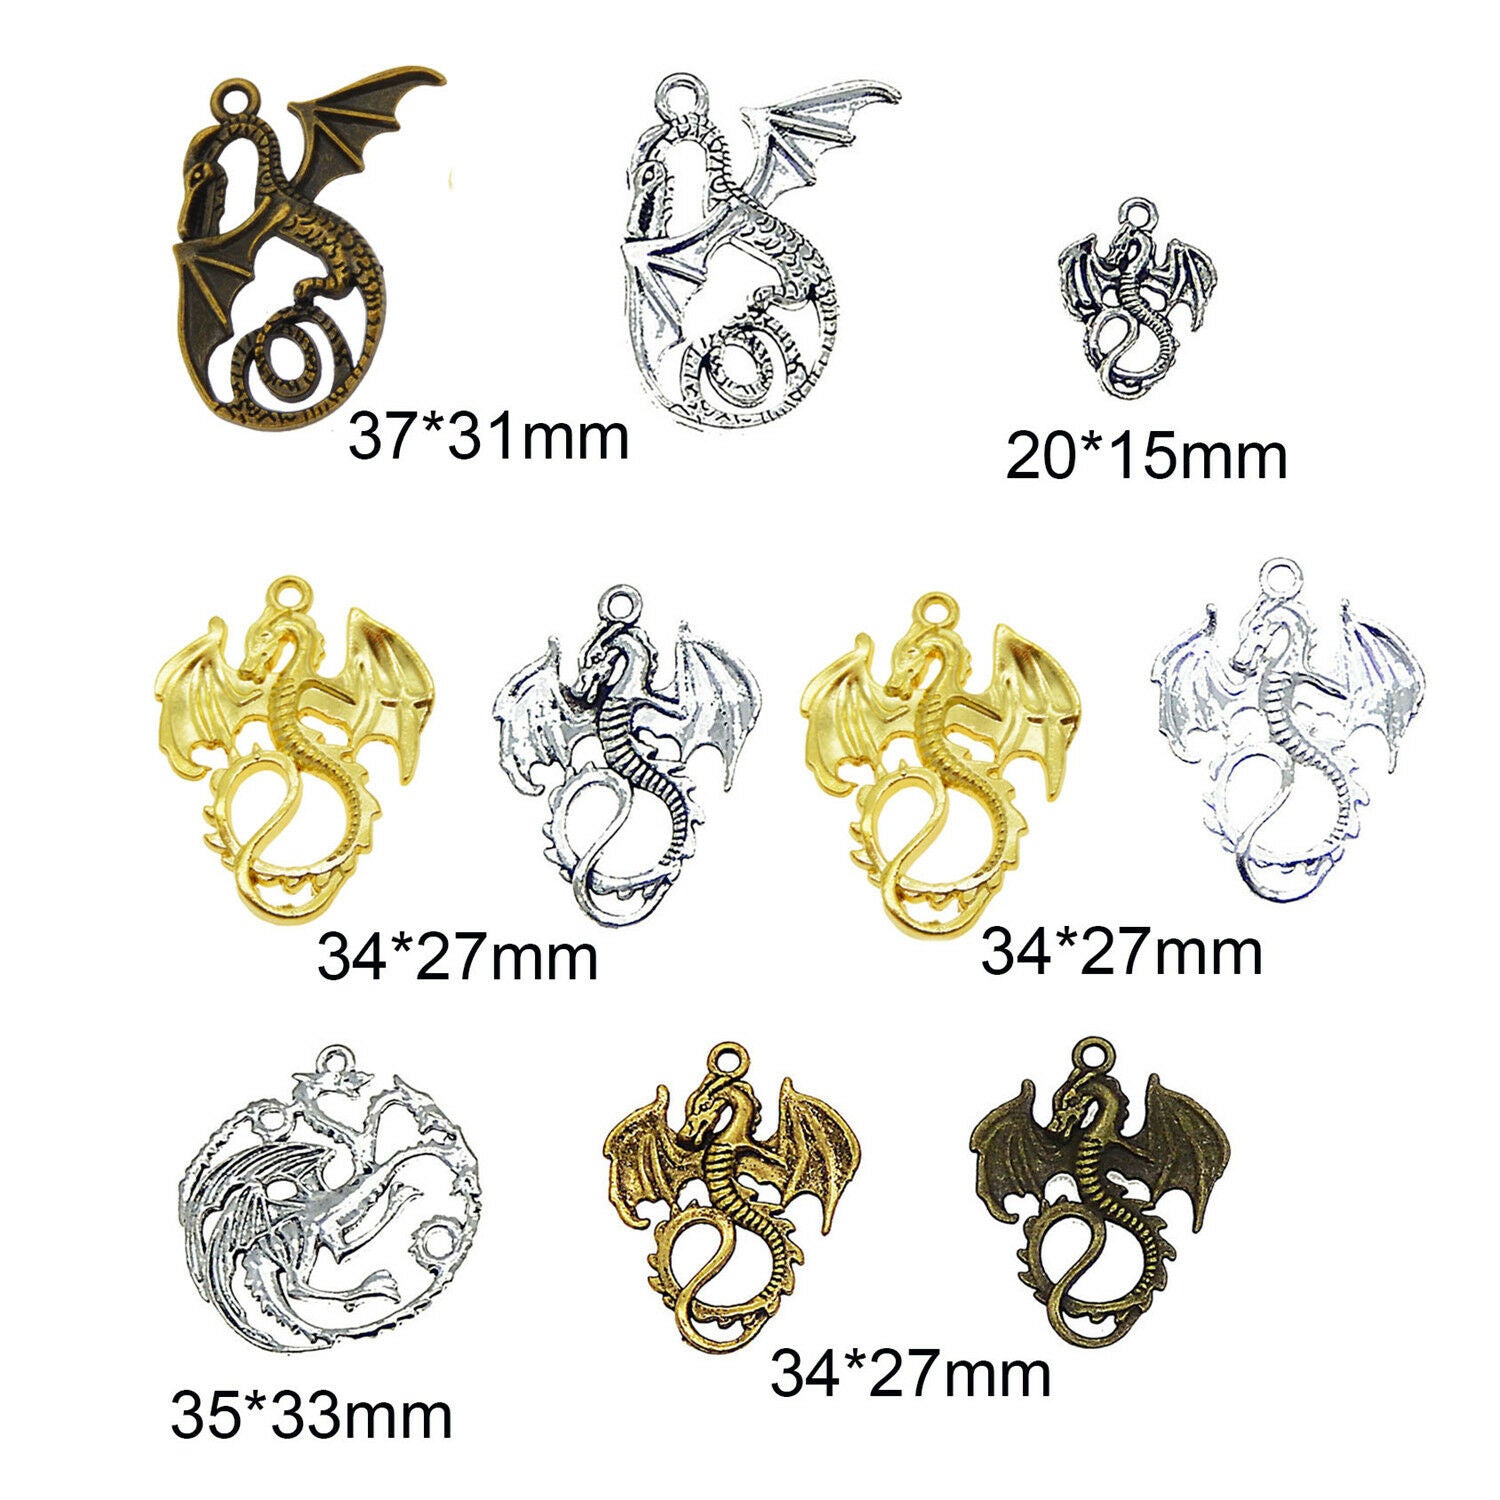 10 Mix Flying Dragon Pendant Winged Alloy Charm Bracelet Necklace Craft Jewelry